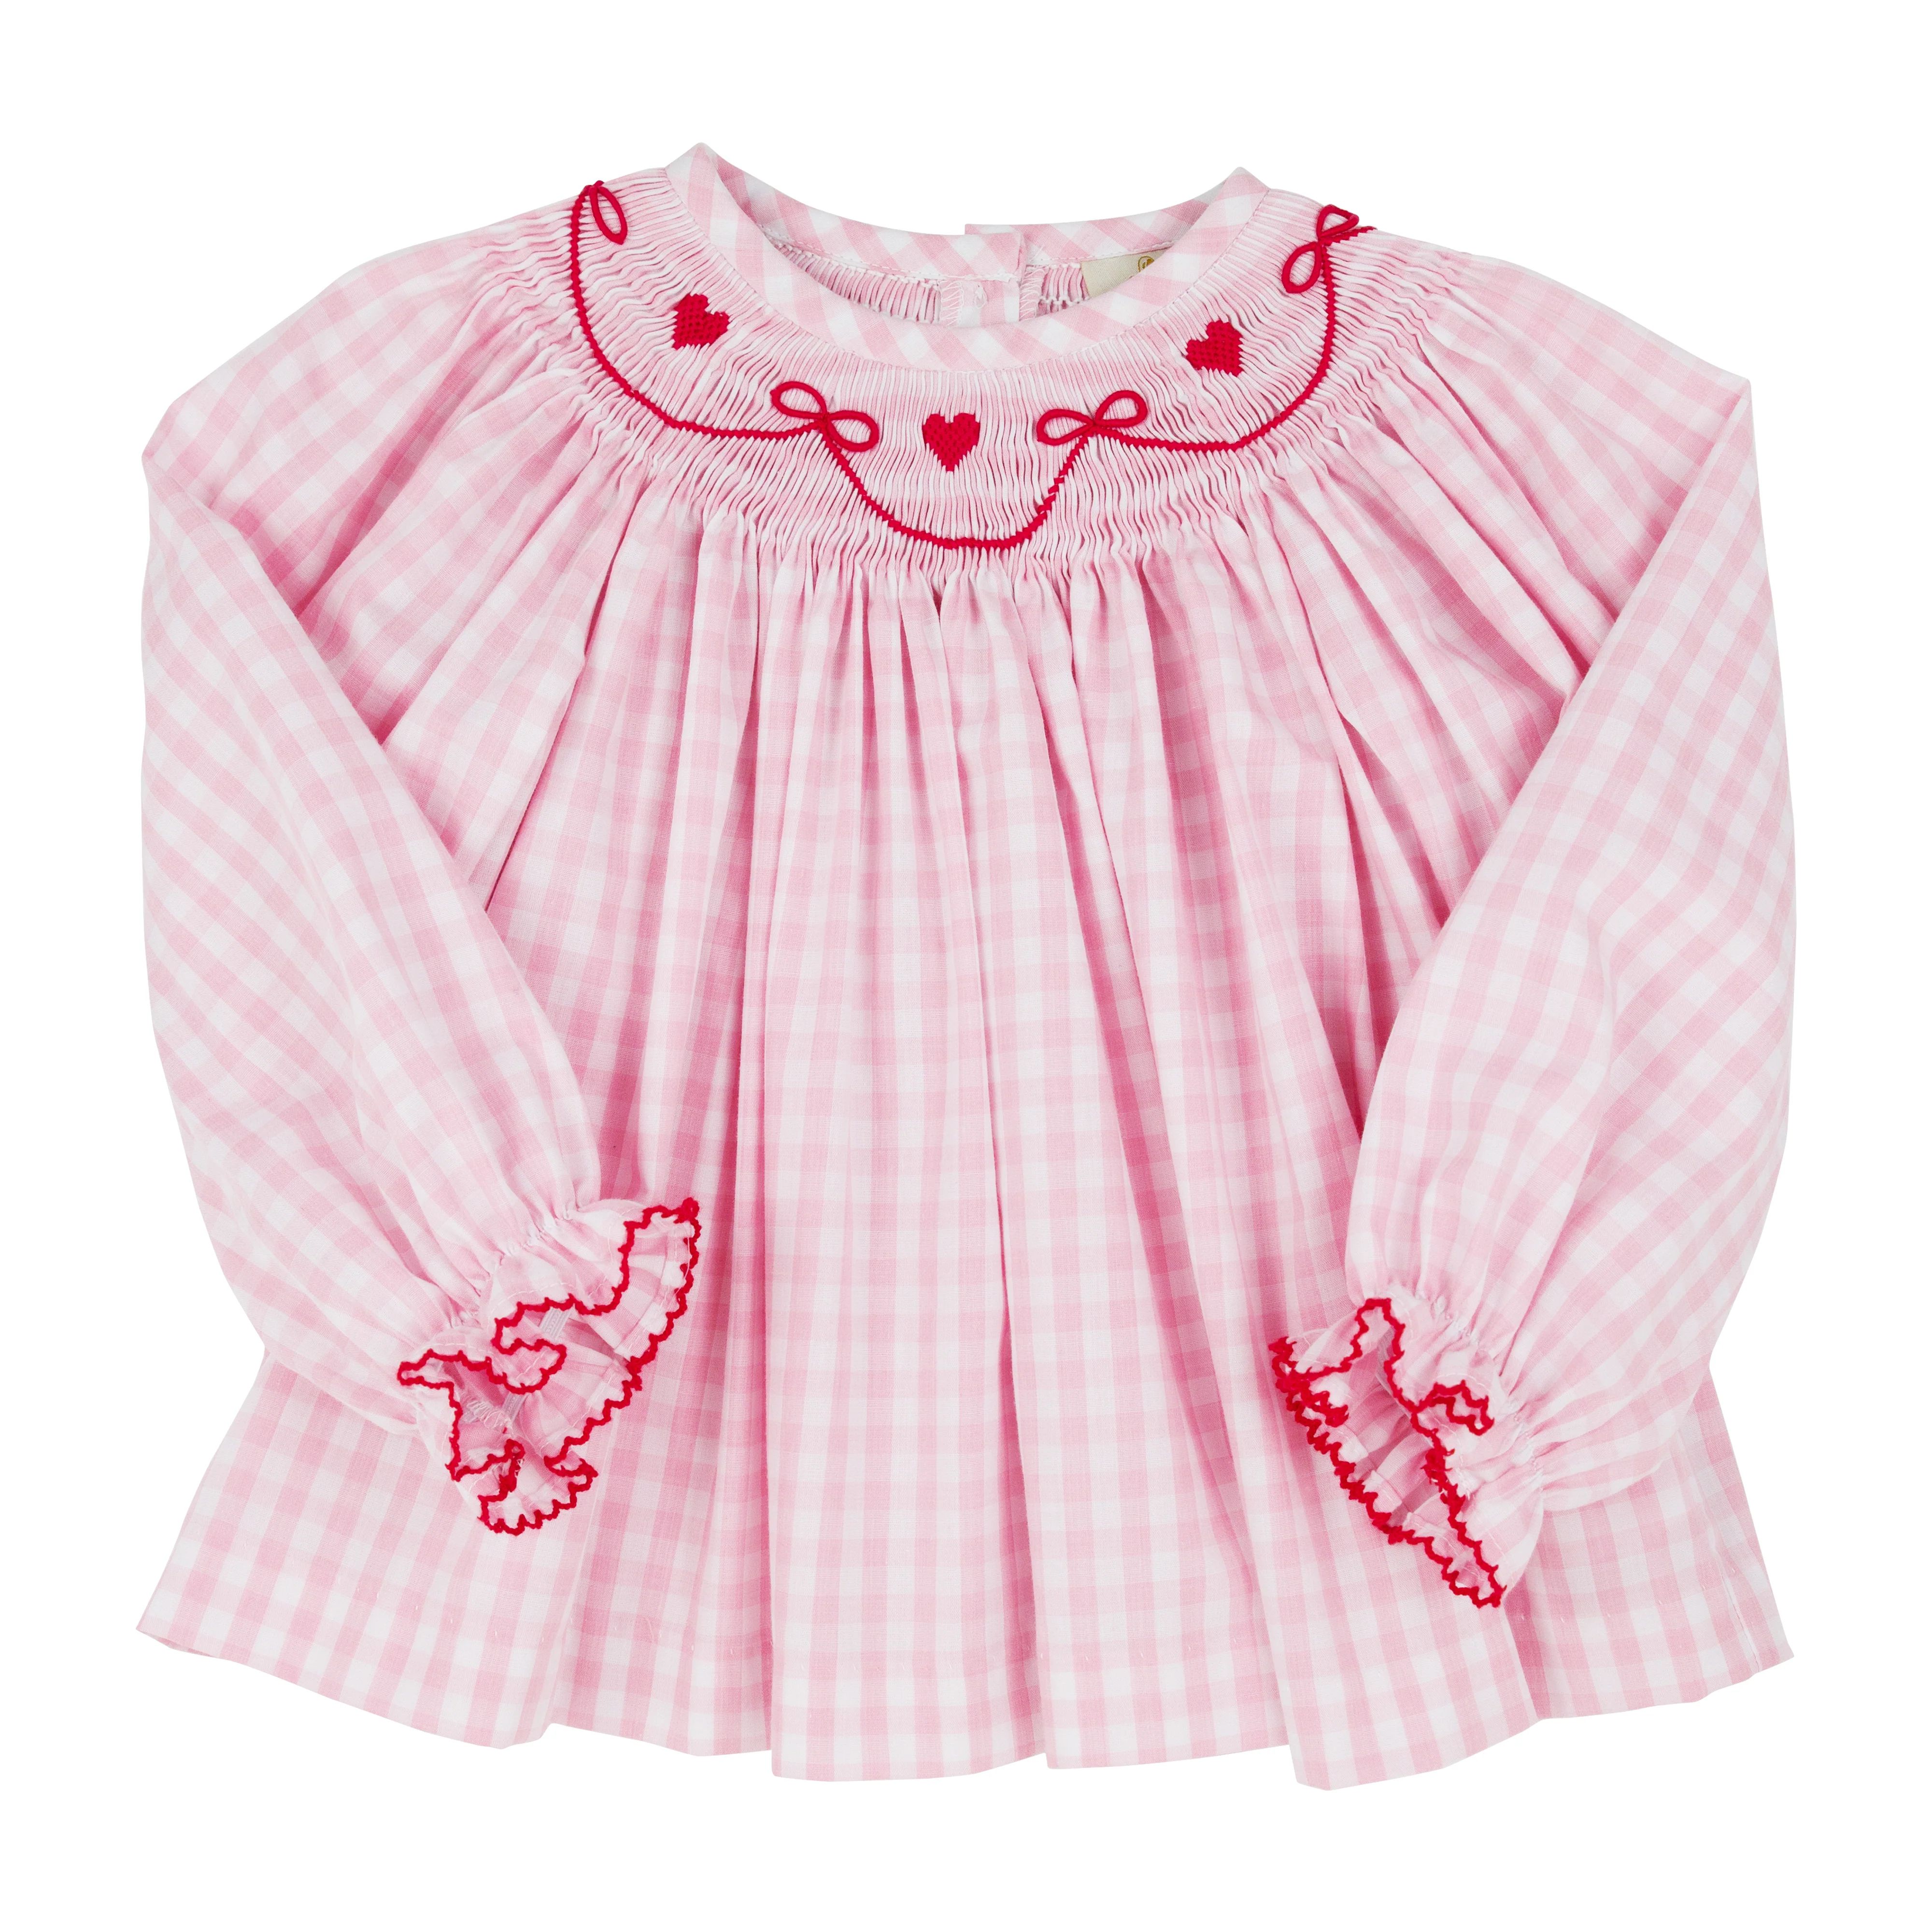 Bettye Sue Smocked Top - Sandpearl Pink Gingham with Richmond Red Smocking | The Beaufort Bonnet Company